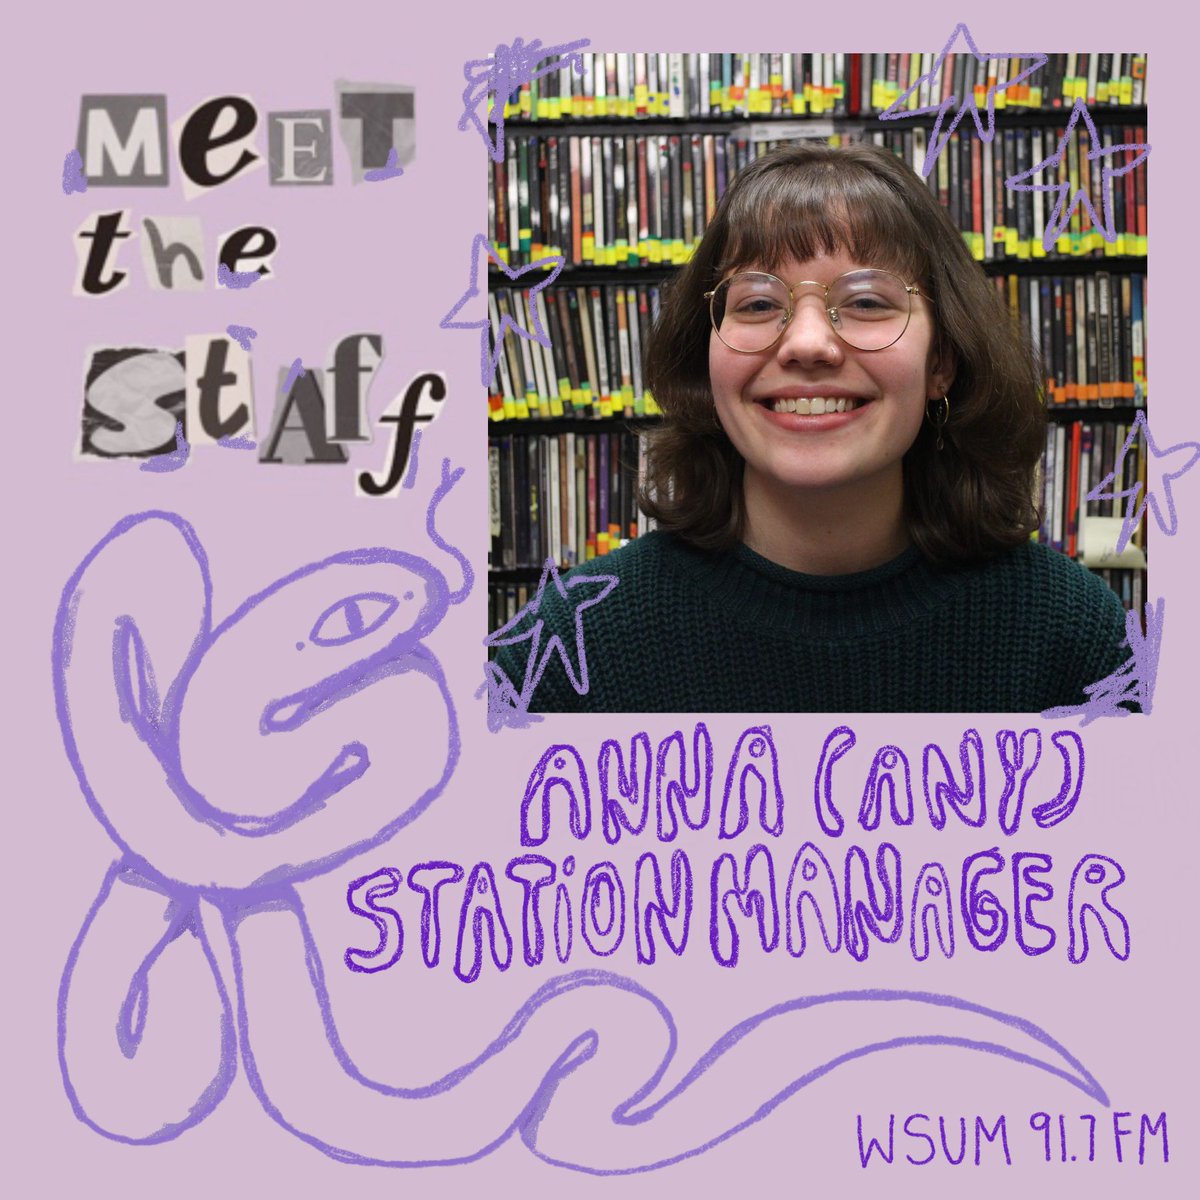 Meet The Staff!!! 🐍 Station Manager 🐍 Anna (any pronouns) Office Hours: Tuesdays, 3-5 PM Tune into their show Perfect Sound Whatever, 'folk/rock/soul etc. and music history-focused, Sundays 9 PM on FM'